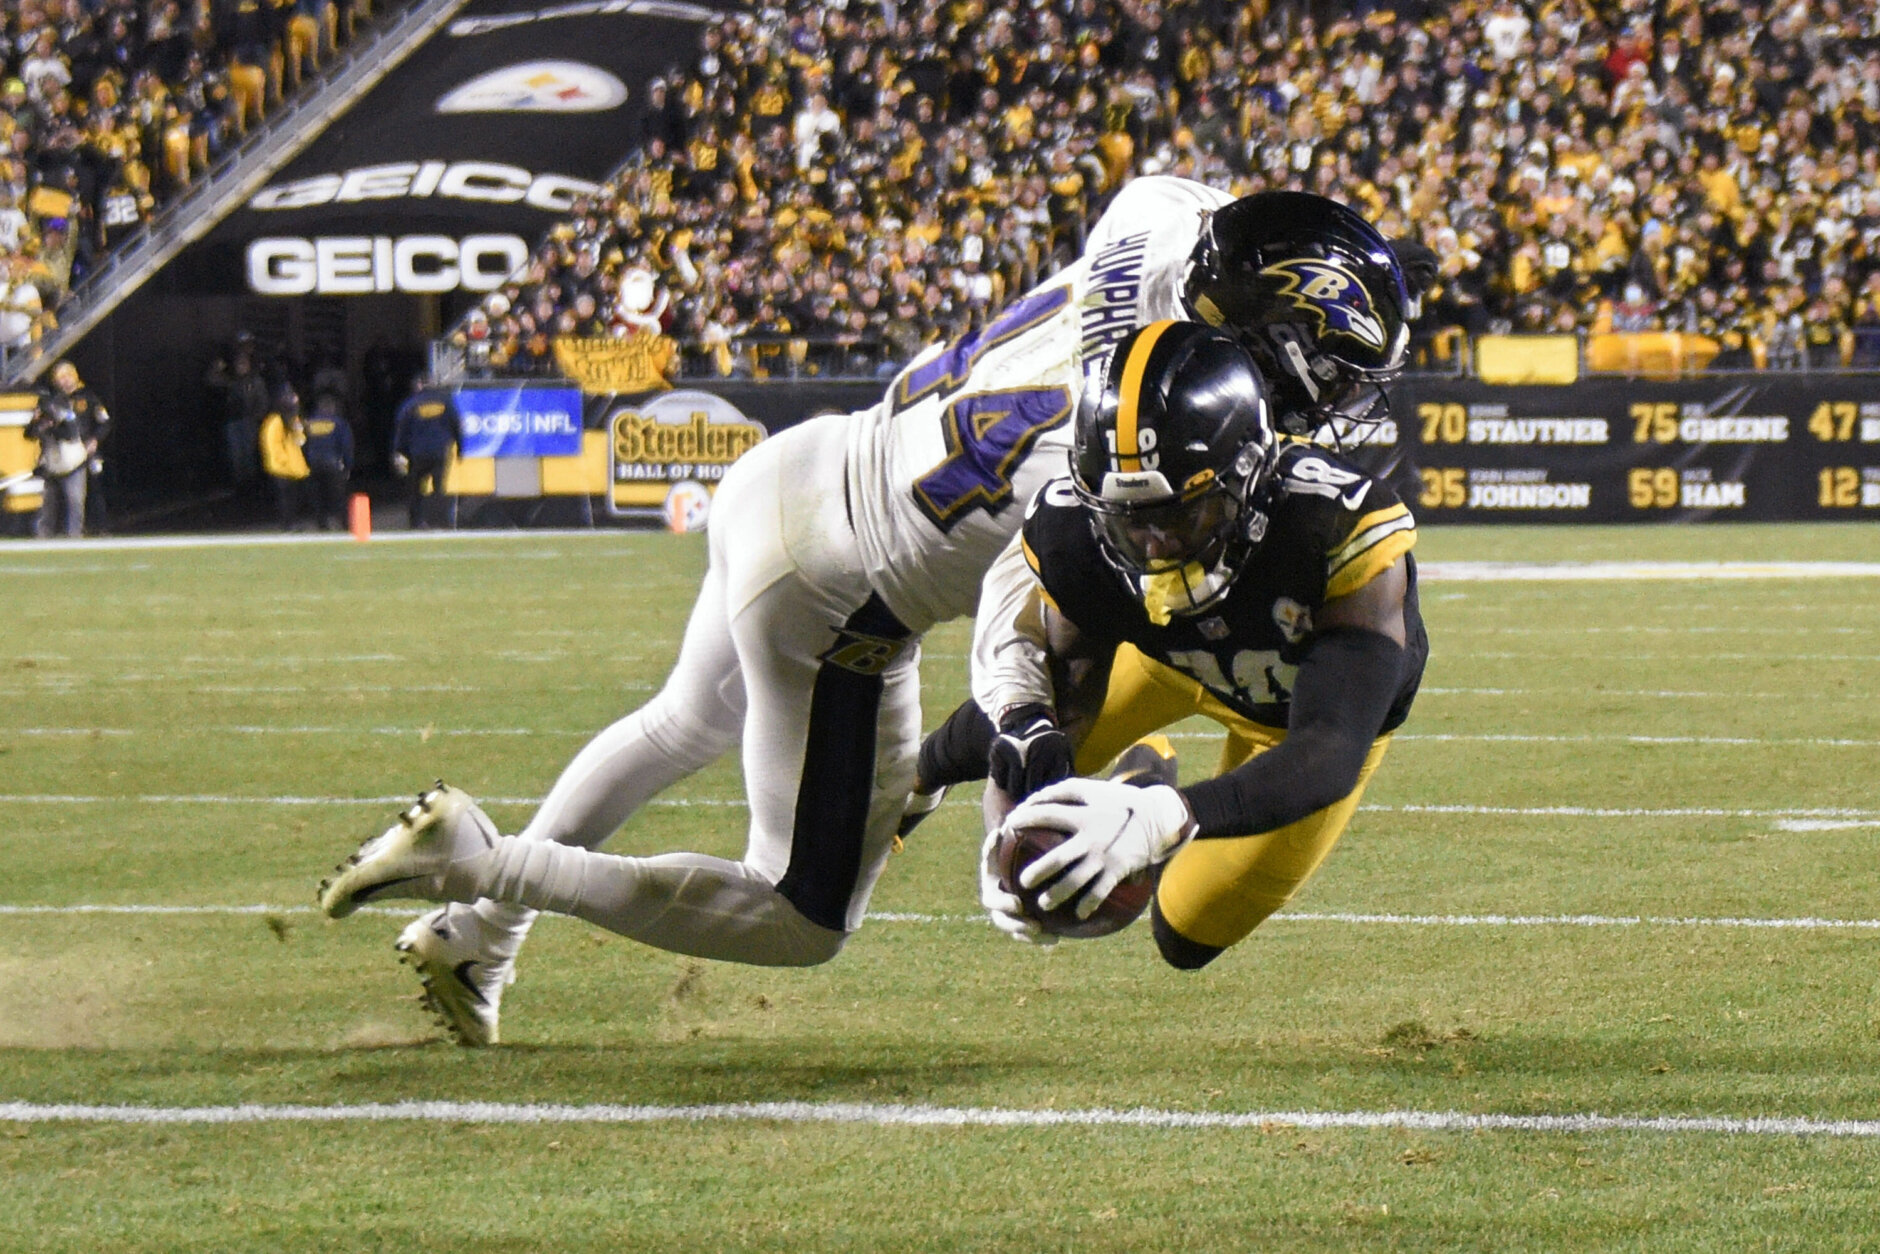 <p><em><strong>Ravens 19</strong></em><br />
<em><strong>Steelers 20</strong></em></p>
<p>Baltimore had <a href="https://twitter.com/ESPNStatsInfo/status/1467631566088200196?s=20" target="_blank" rel="noopener">a once-in-a-generation drive</a> against Pittsburgh&#8217;s worst defense since 1988, but the 30th game between Mike Tomlin and John Harbaugh was decided when the latter opted to go for two rather than take the game-tying extra point. Even if <a href="https://profootballtalk.nbcsports.com/2021/12/05/john-harbaugh-on-going-for-two-we-were-out-of-corners-tried-to-win-game-right-there/" target="_blank" rel="noopener">Harbaugh&#8217;s reasoning is sound</a> (<a href="https://www.espn.com/nfl/story/_/id/32800759/ravens-john-harbaugh-decision-go-2-game-tying-pat-loss-steelers-were-pretty-much-corners" target="_blank" rel="noopener">and his movie references on point</a>), the Ravens may just regret not burying the Steelers while they had the chance. <a href="https://www.youtube.com/watch?v=7oXtISrMwVc" target="_blank" rel="noopener">Hooo ahhh</a>.</p>
